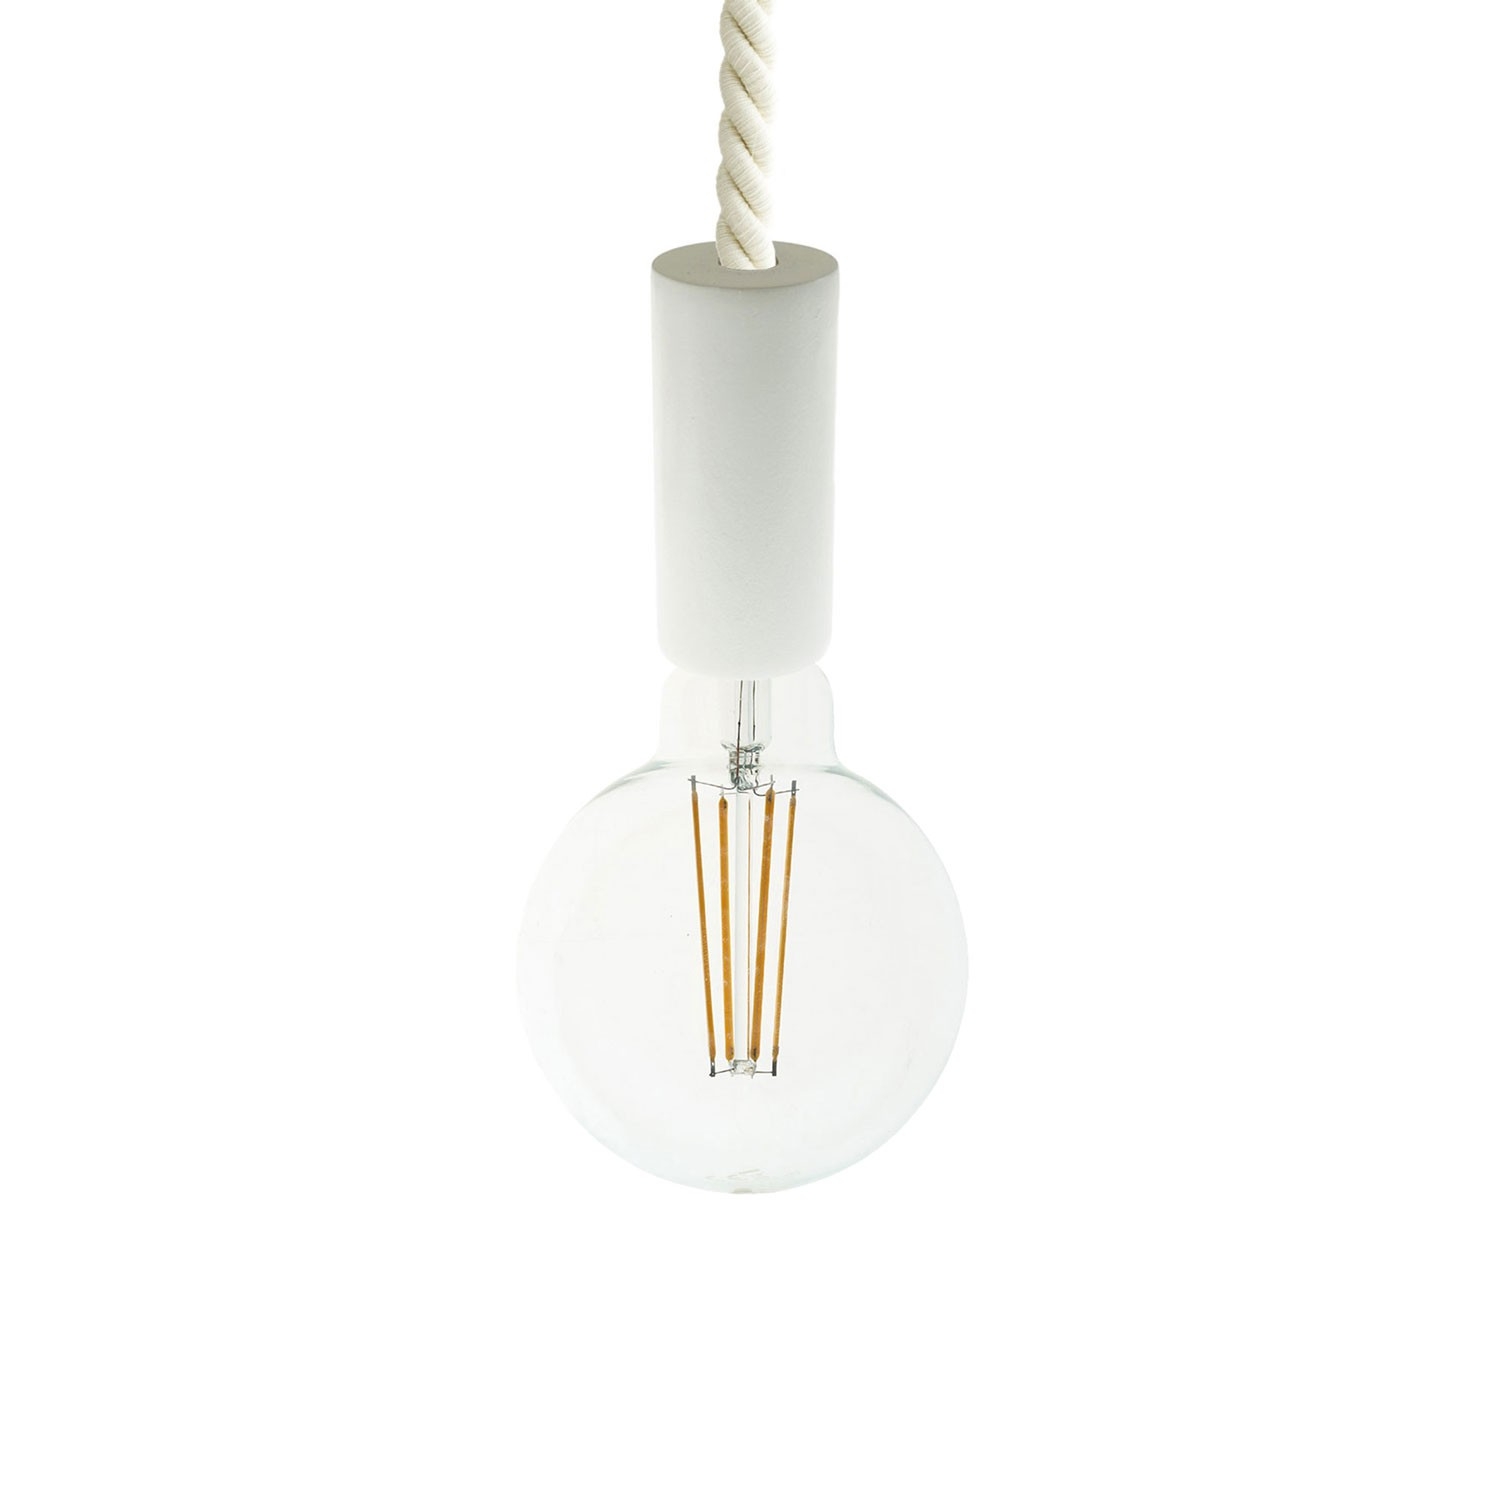 Pendant lamp with XL 16mm nautical cord painted wood details - Made in Italy